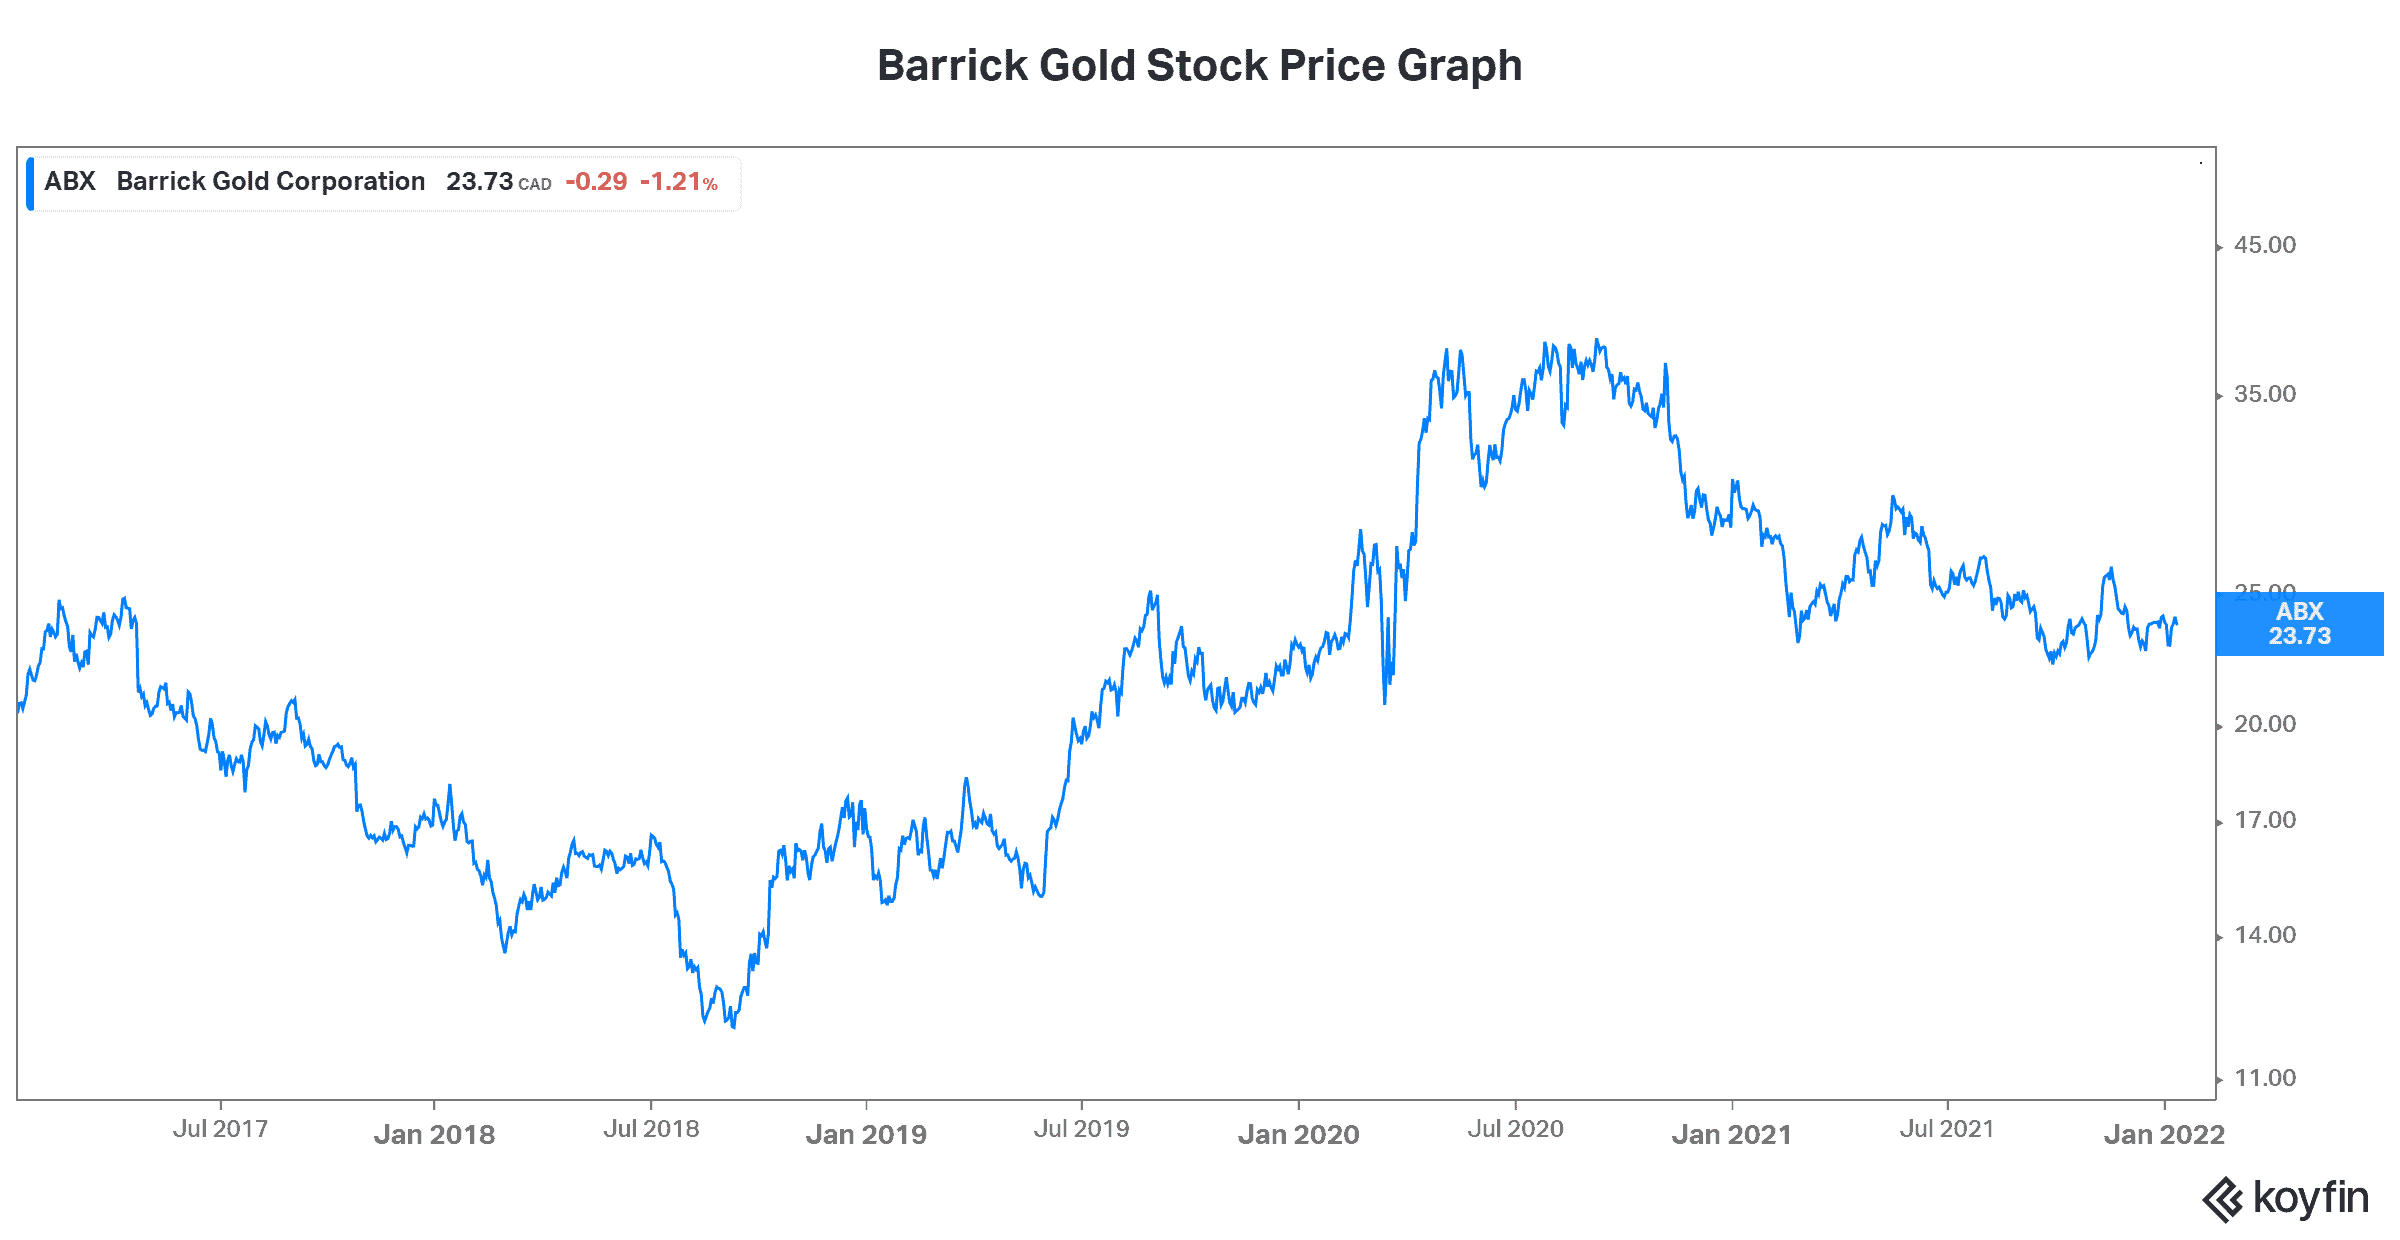 Barrick gold stock inflation hedge